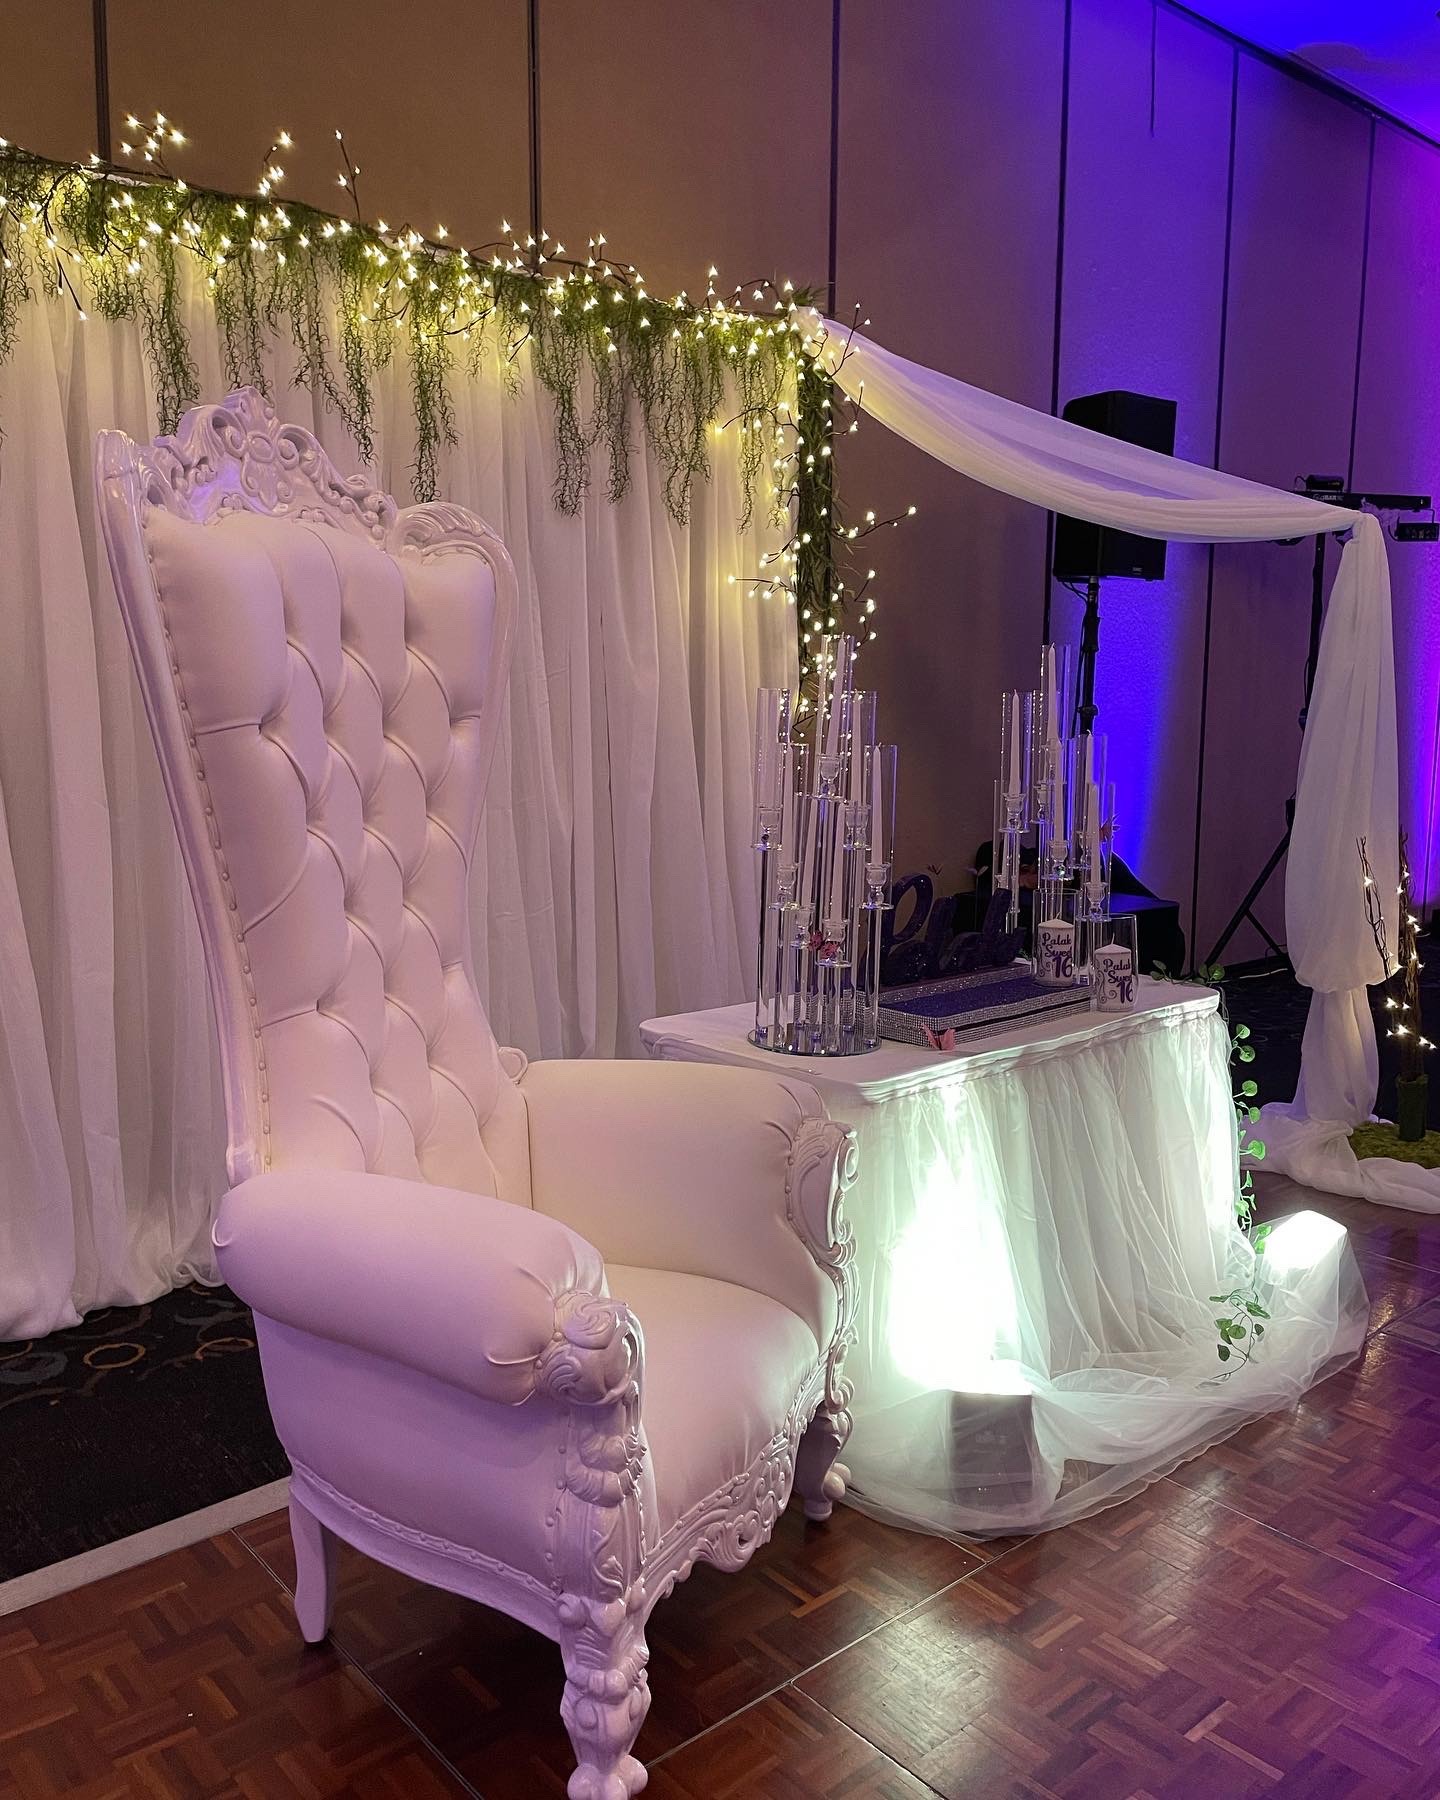 Throne and Backdrop